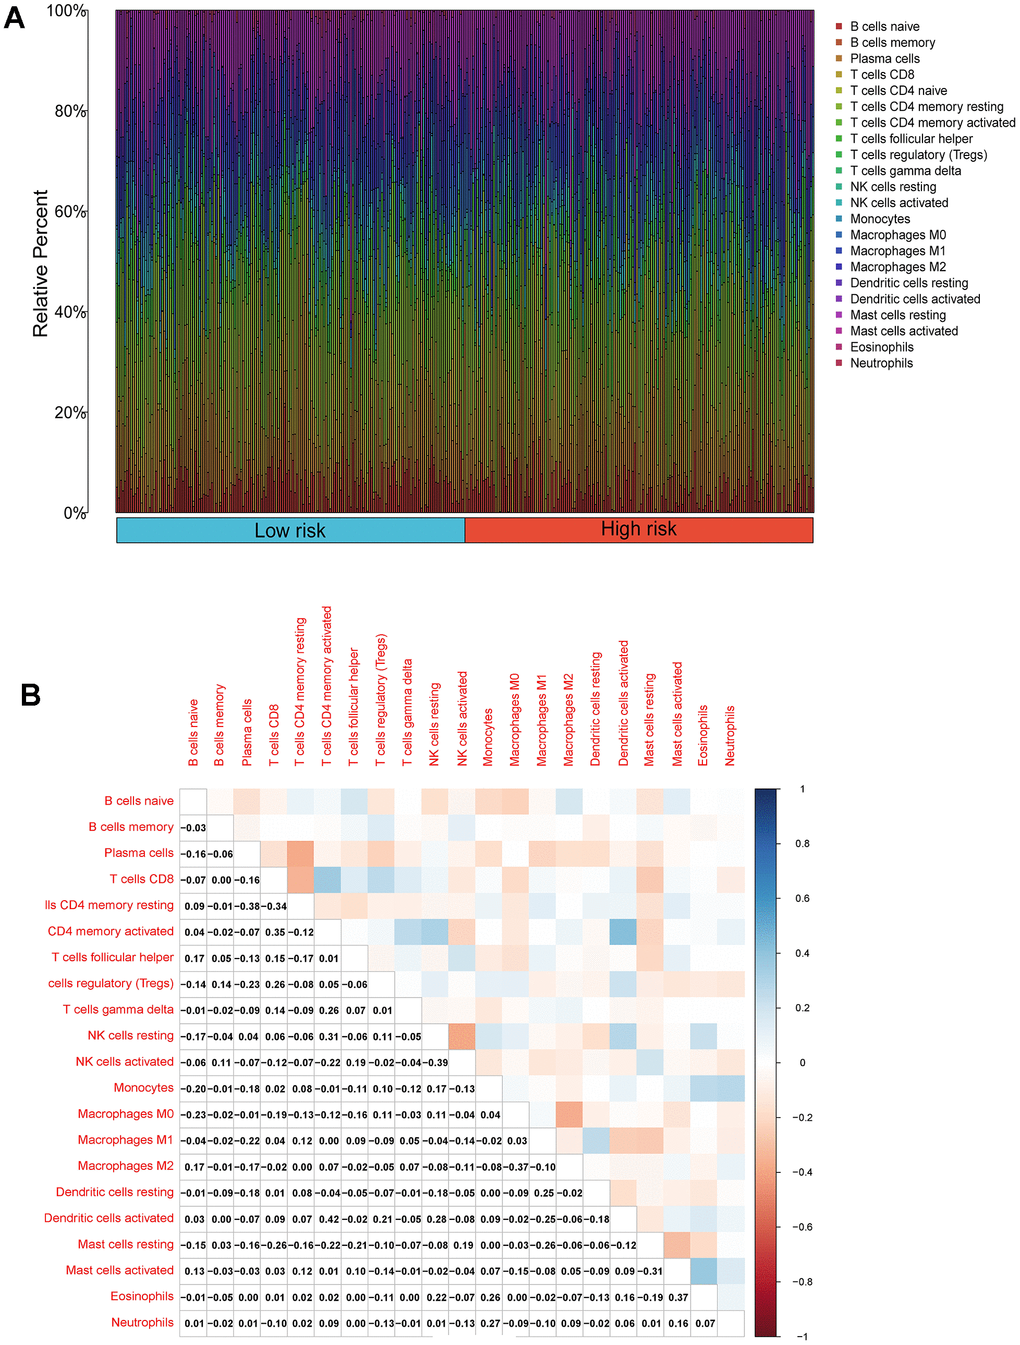 Compositions of infiltrated immune cells between low-risk and high-risk groups in TCGA-PRAD. (A) Abundance of 22 immune cell types in TCGA-PRAD. (B) Correlation heatmap of the immune cells.